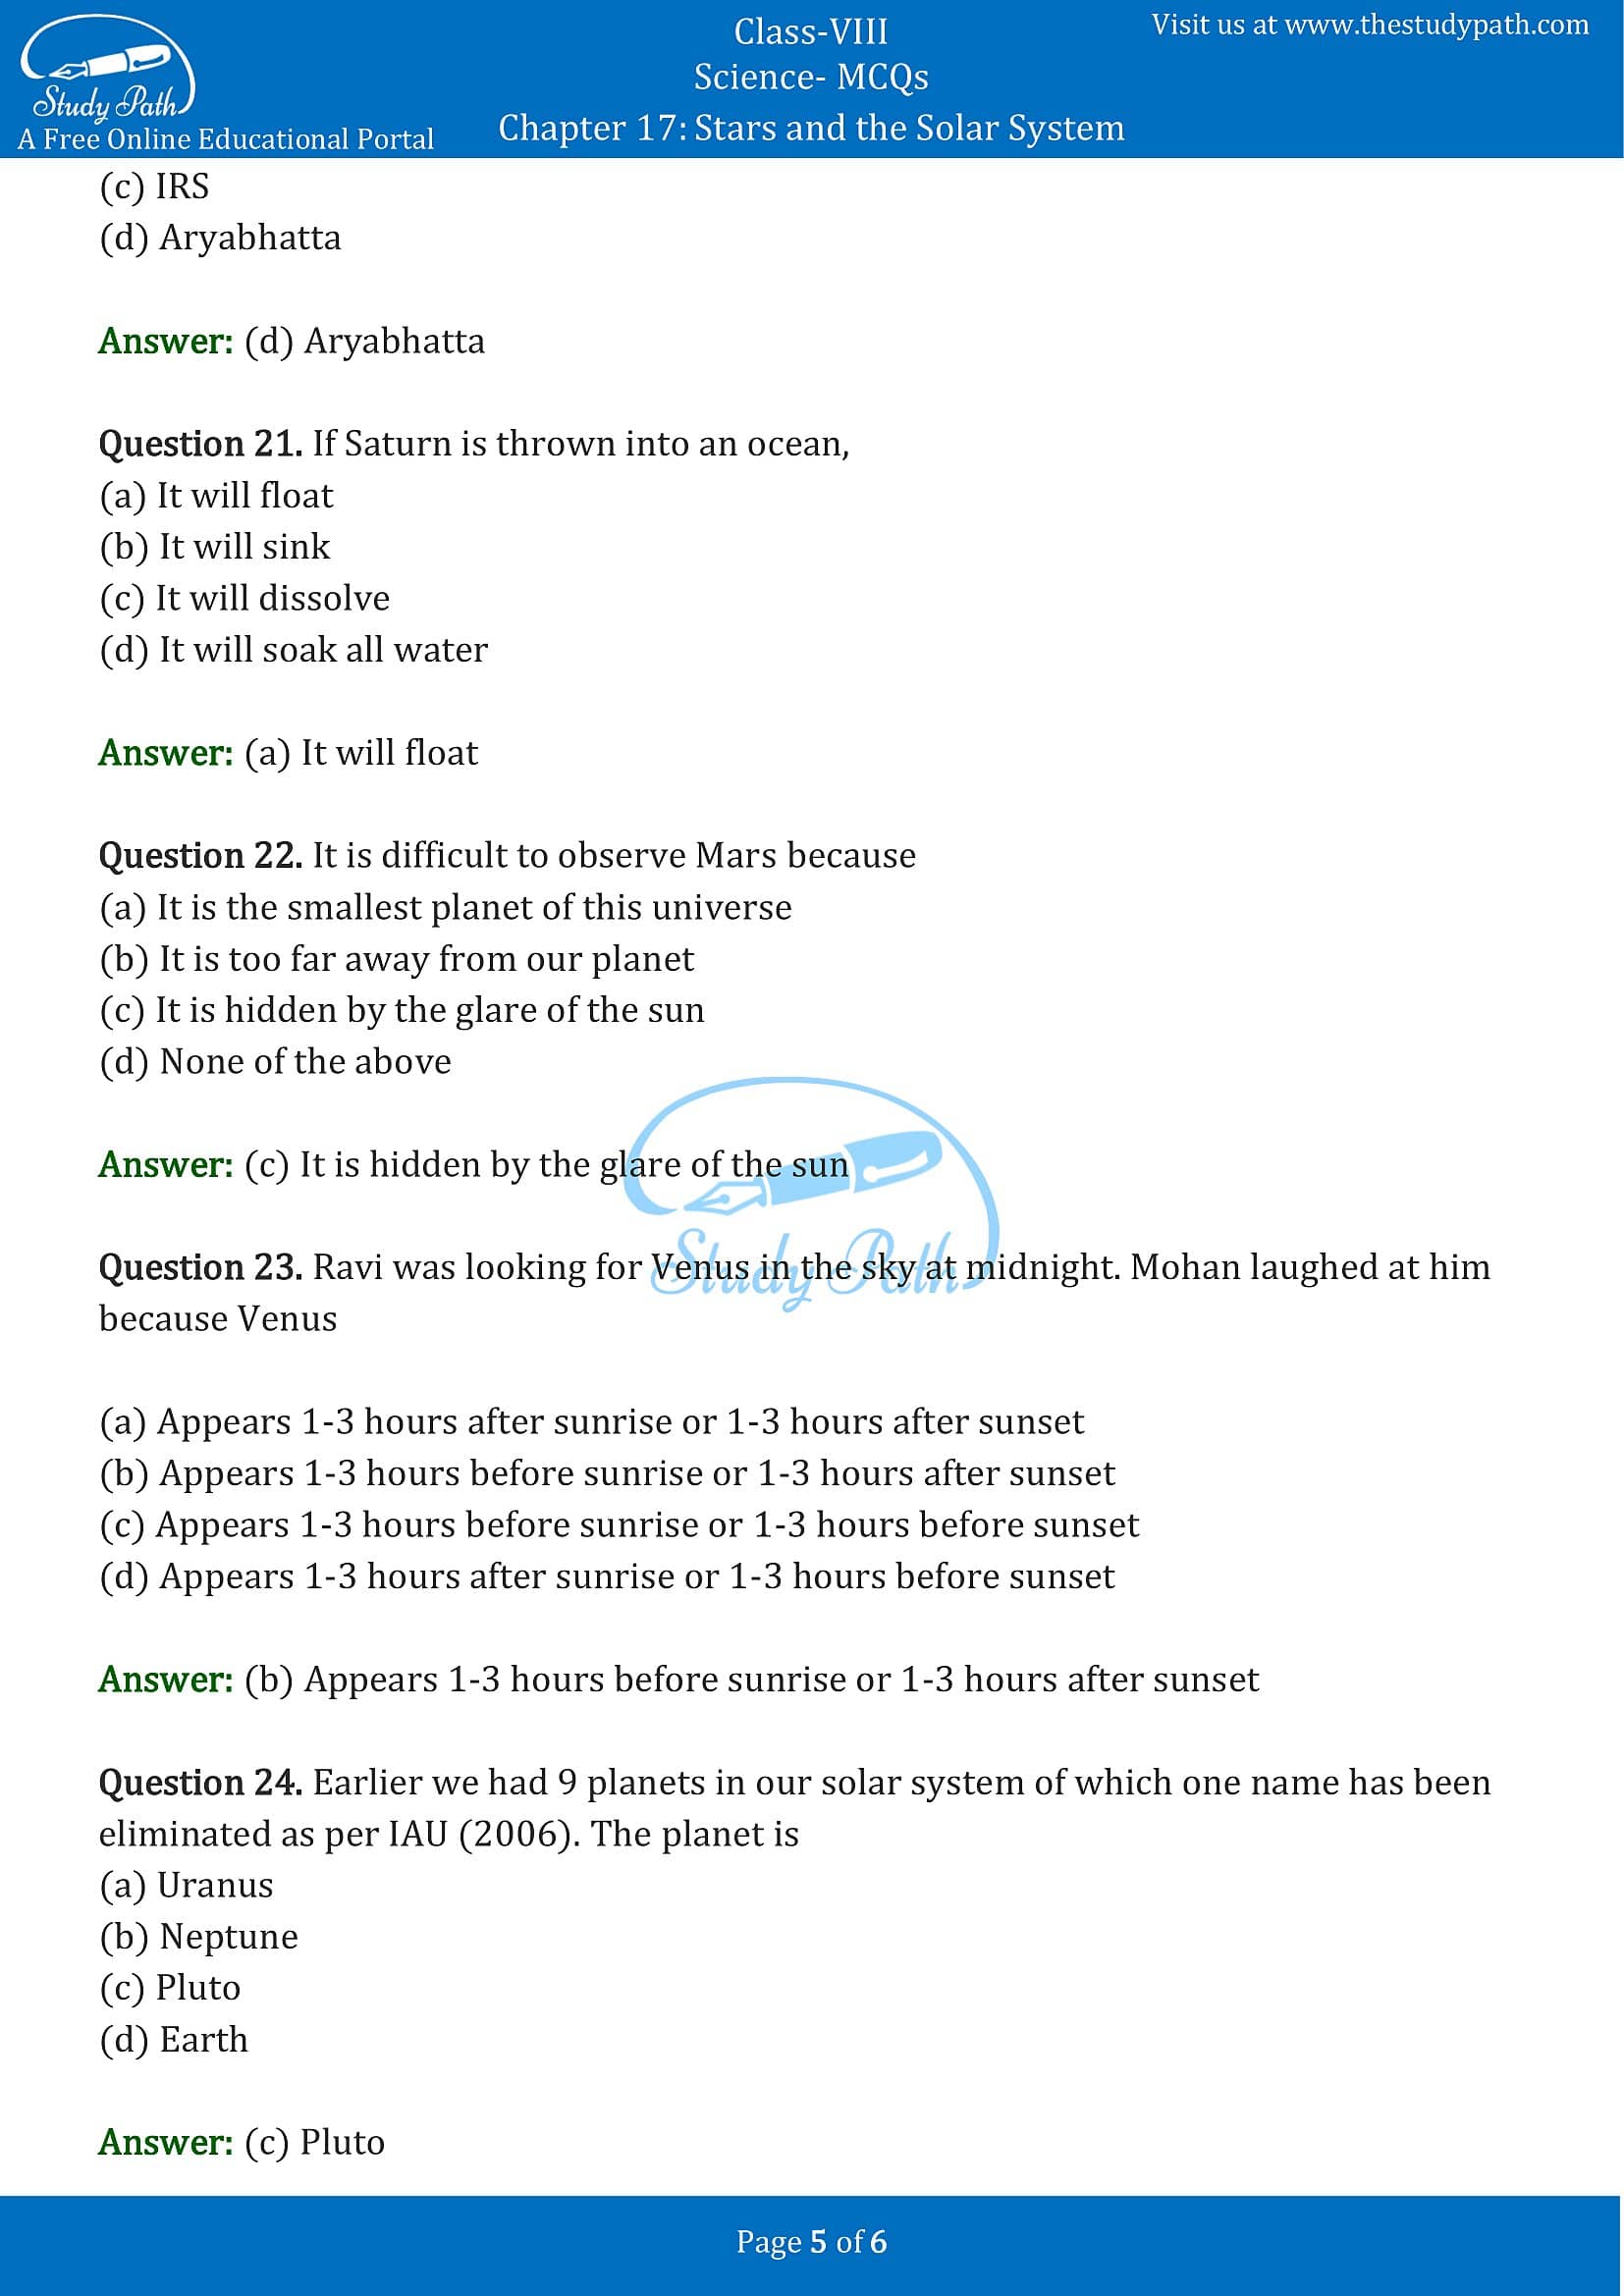 MCQ Questions for Class 8 Science Chapter 17 Stars and the Solar System with Answers PDF -5